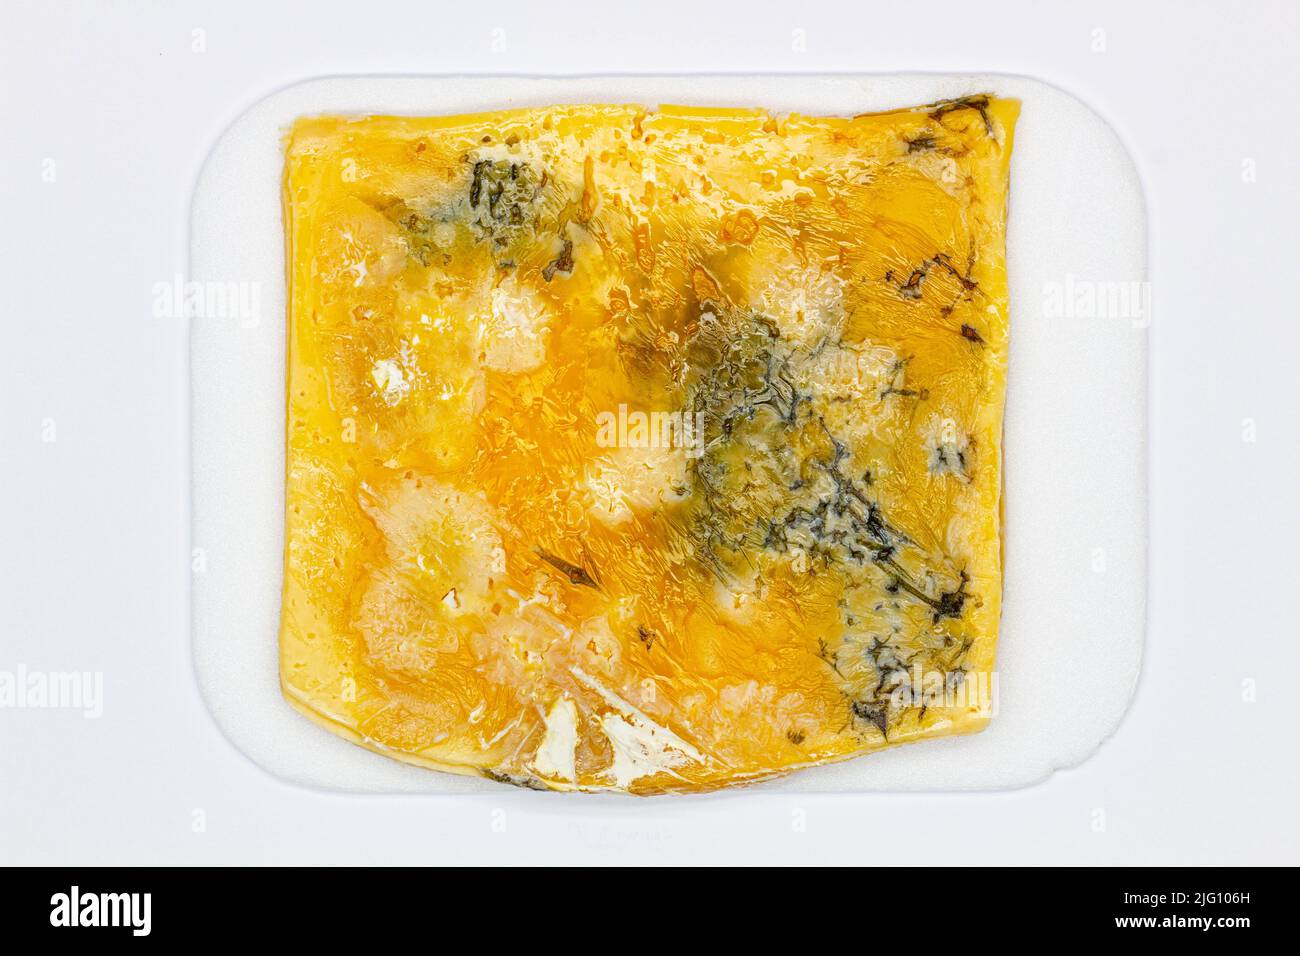 Cheese with mold. A large sliced piece of cheese with holes, long been spoiled and covered with mold. Beautiful view of spoiled food. Yellow moldy Stock Photo